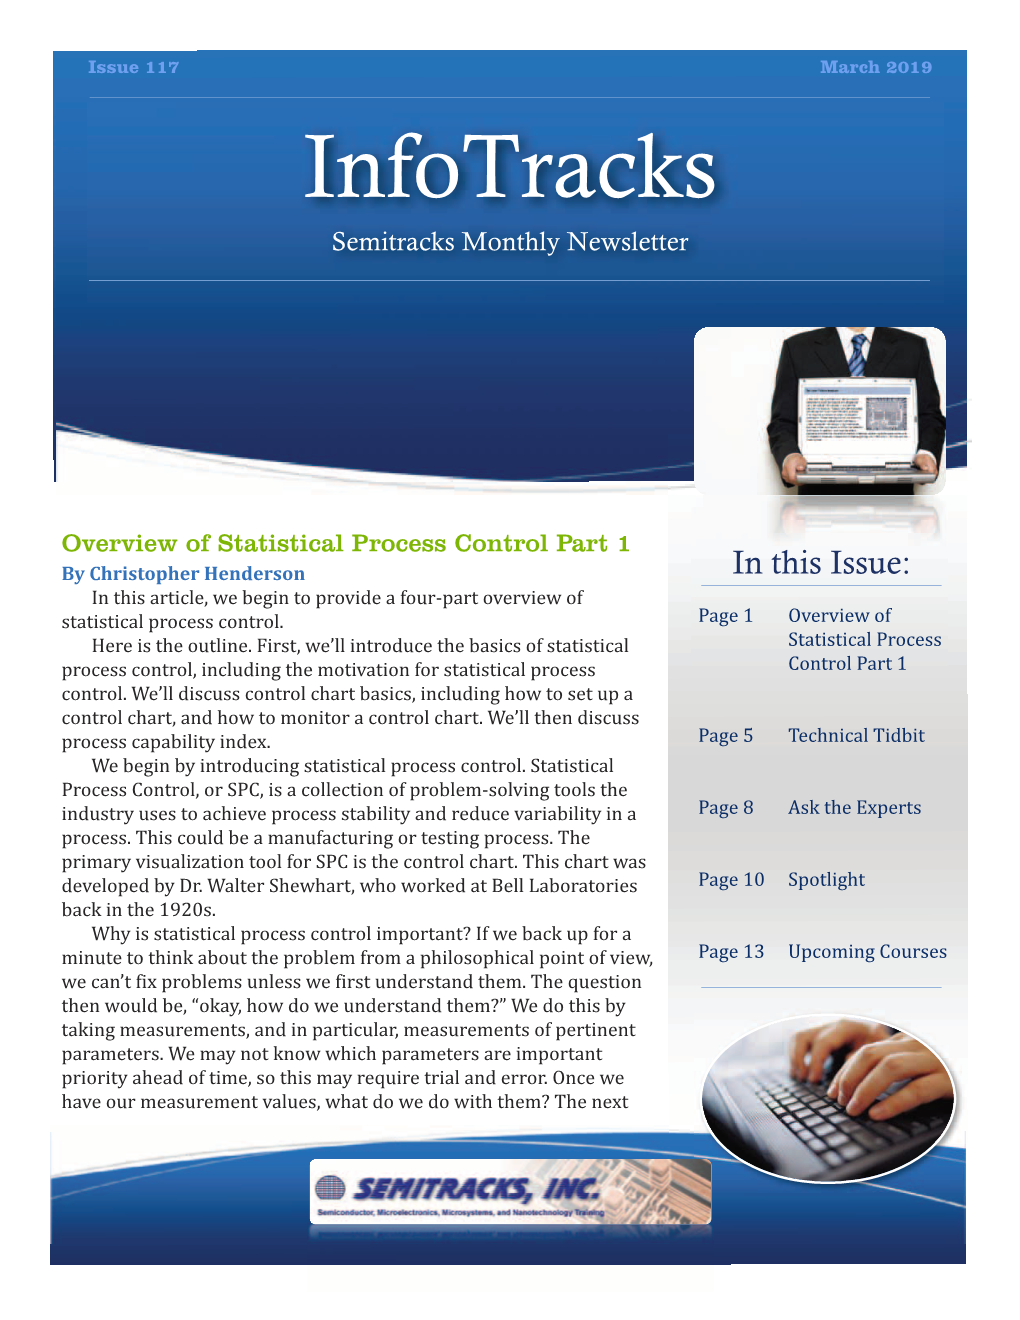 Overview of Statistical Process Control Part 1 by Christopher Henderson in This Article, We Begin to Provide a Four-Part Overview of Statistical Process Control